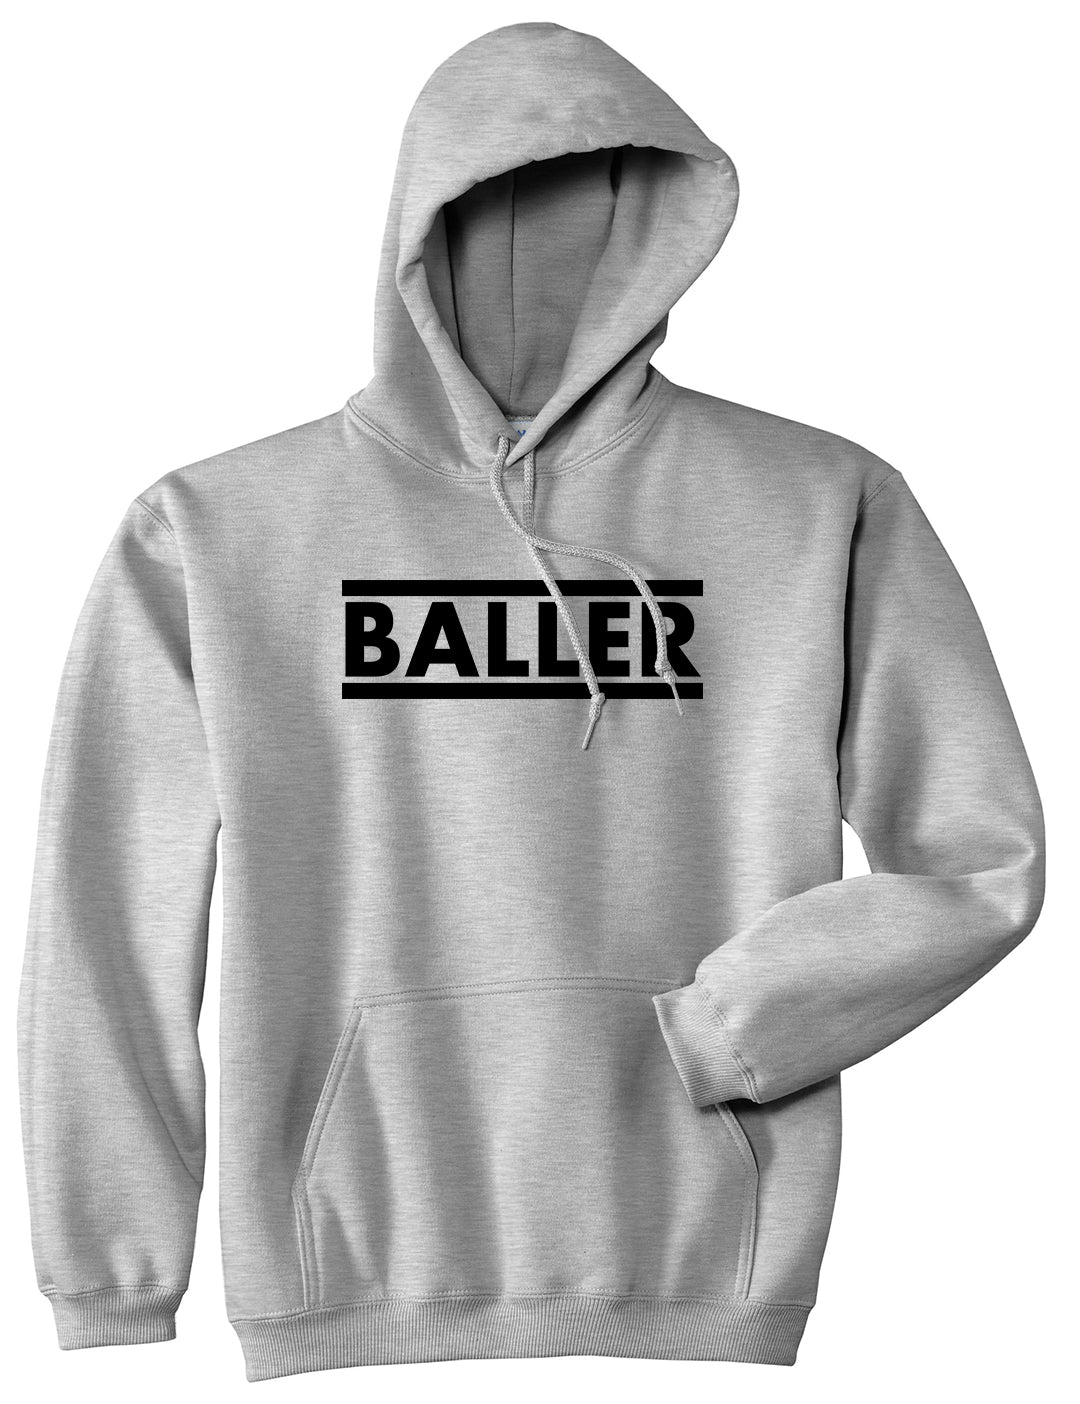 Baller Grey Pullover Hoodie by Kings Of NY